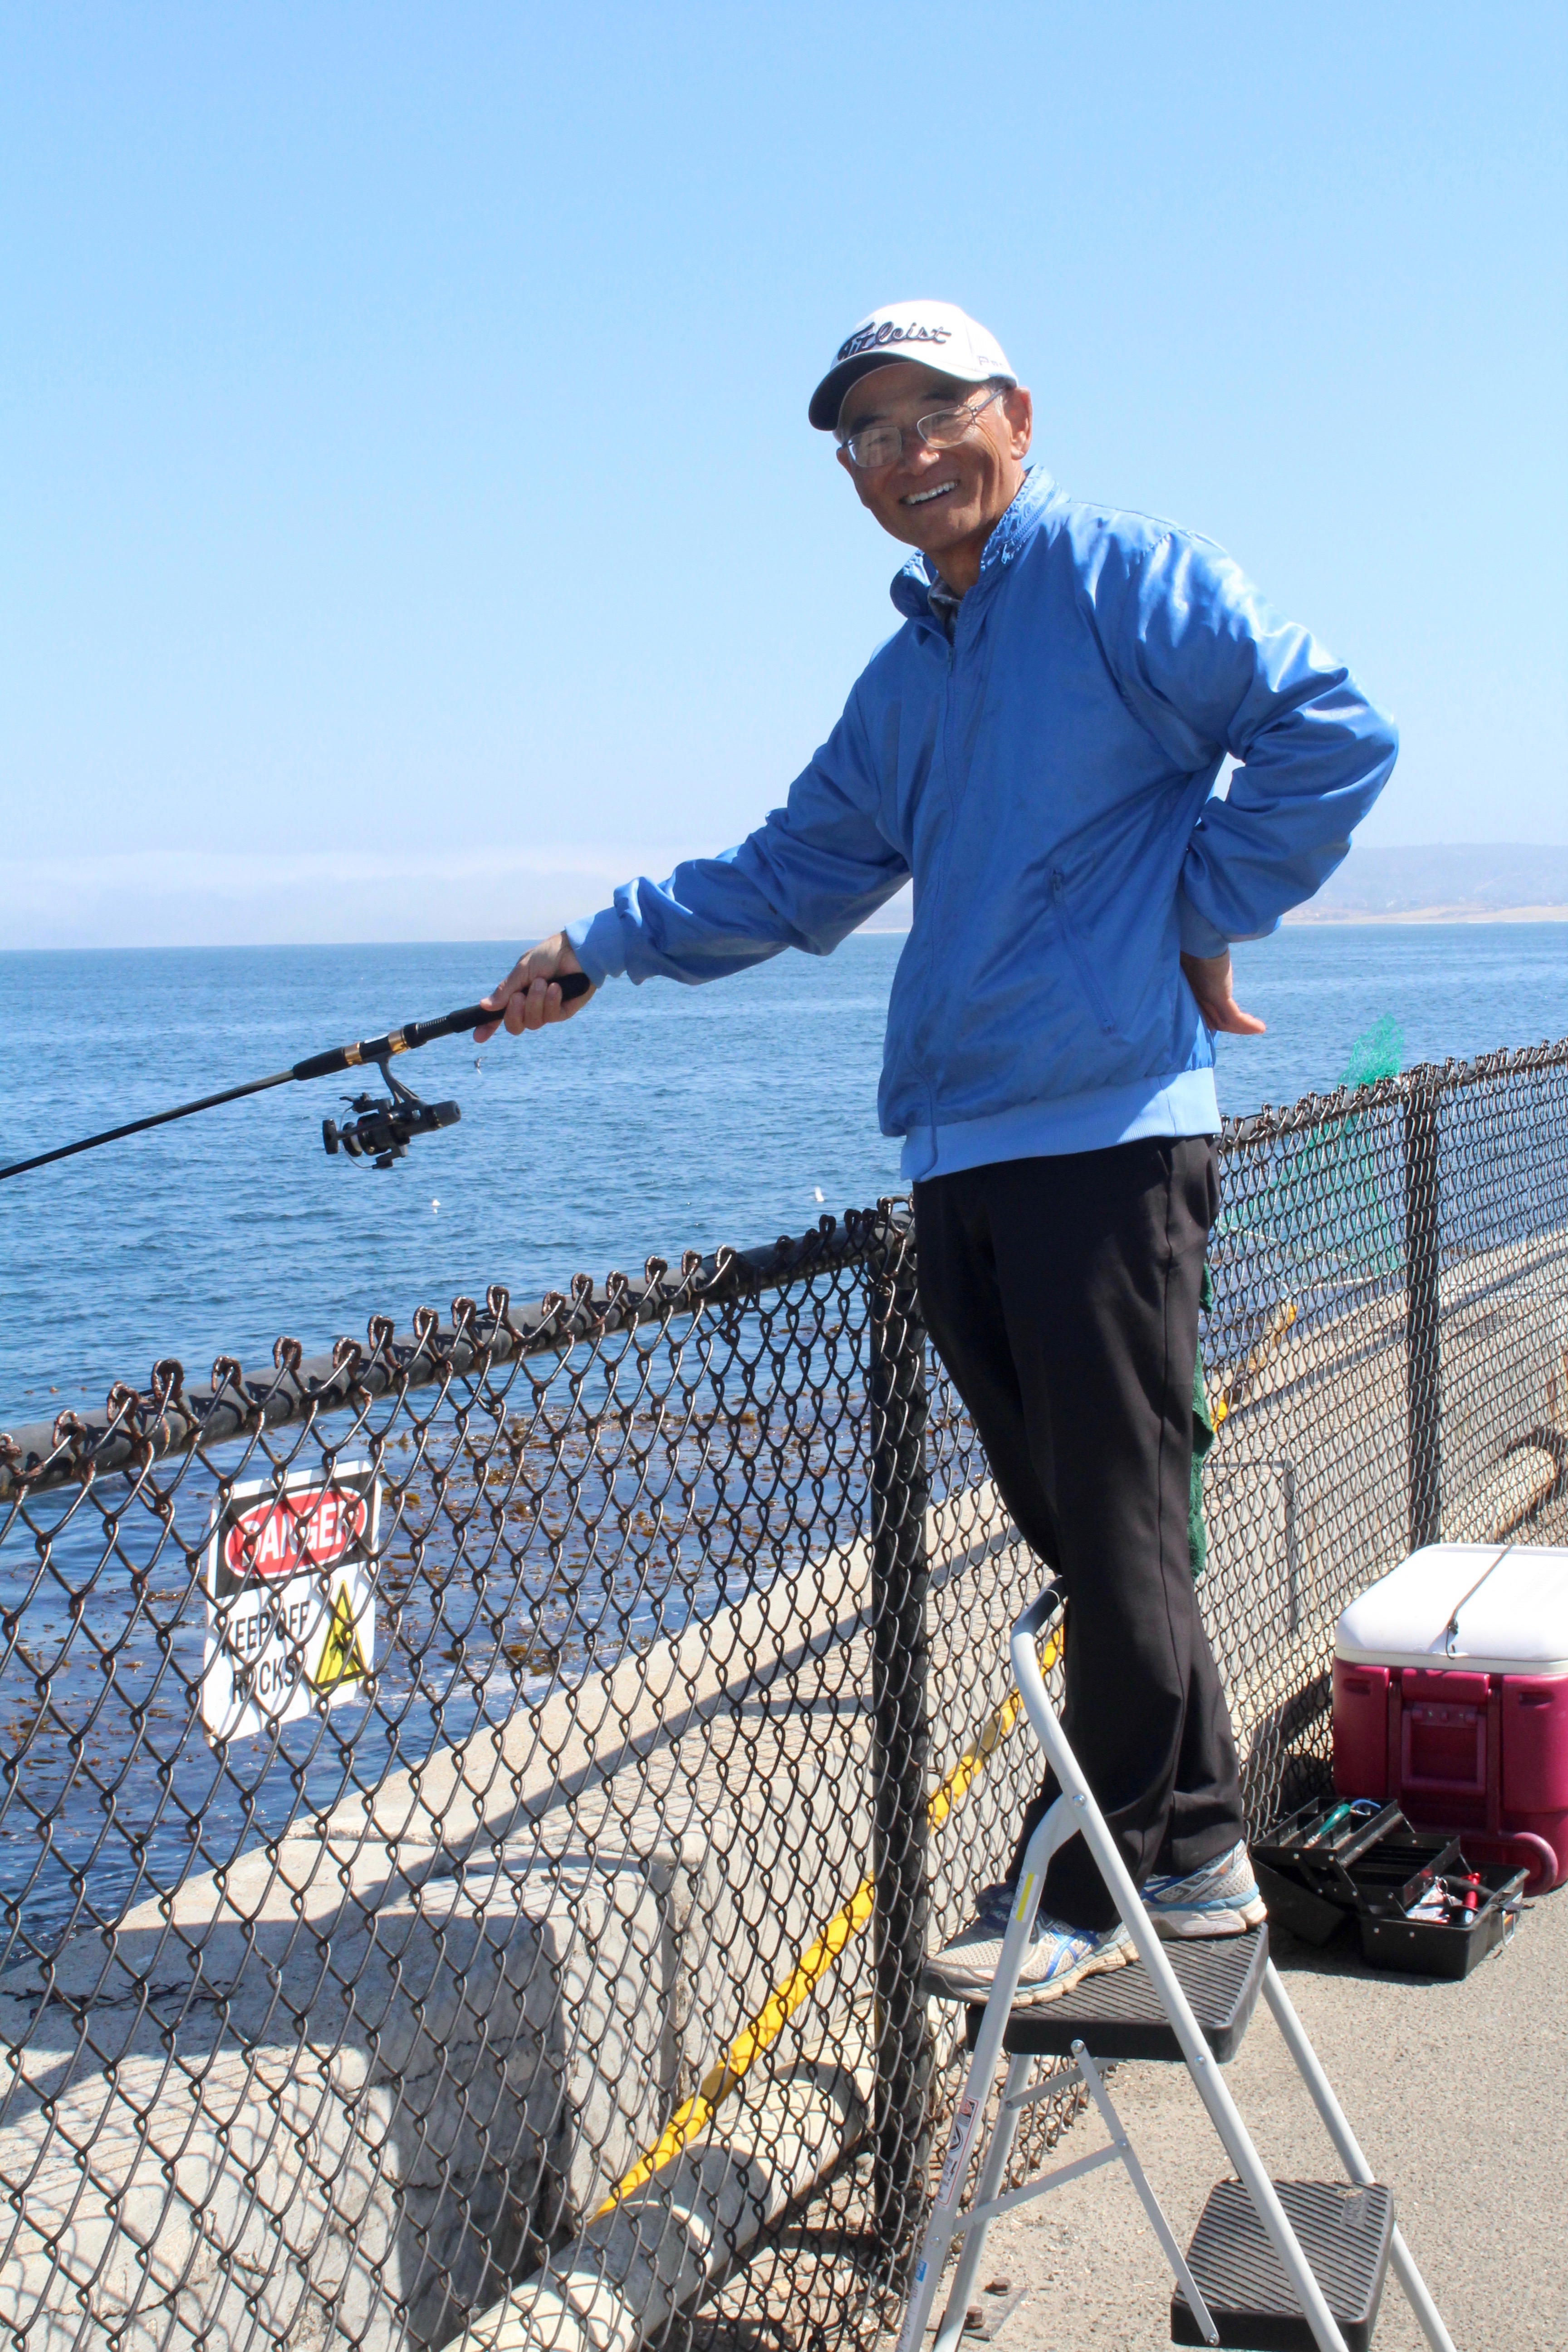 It's still 'anglers choice' on Monterey Bay